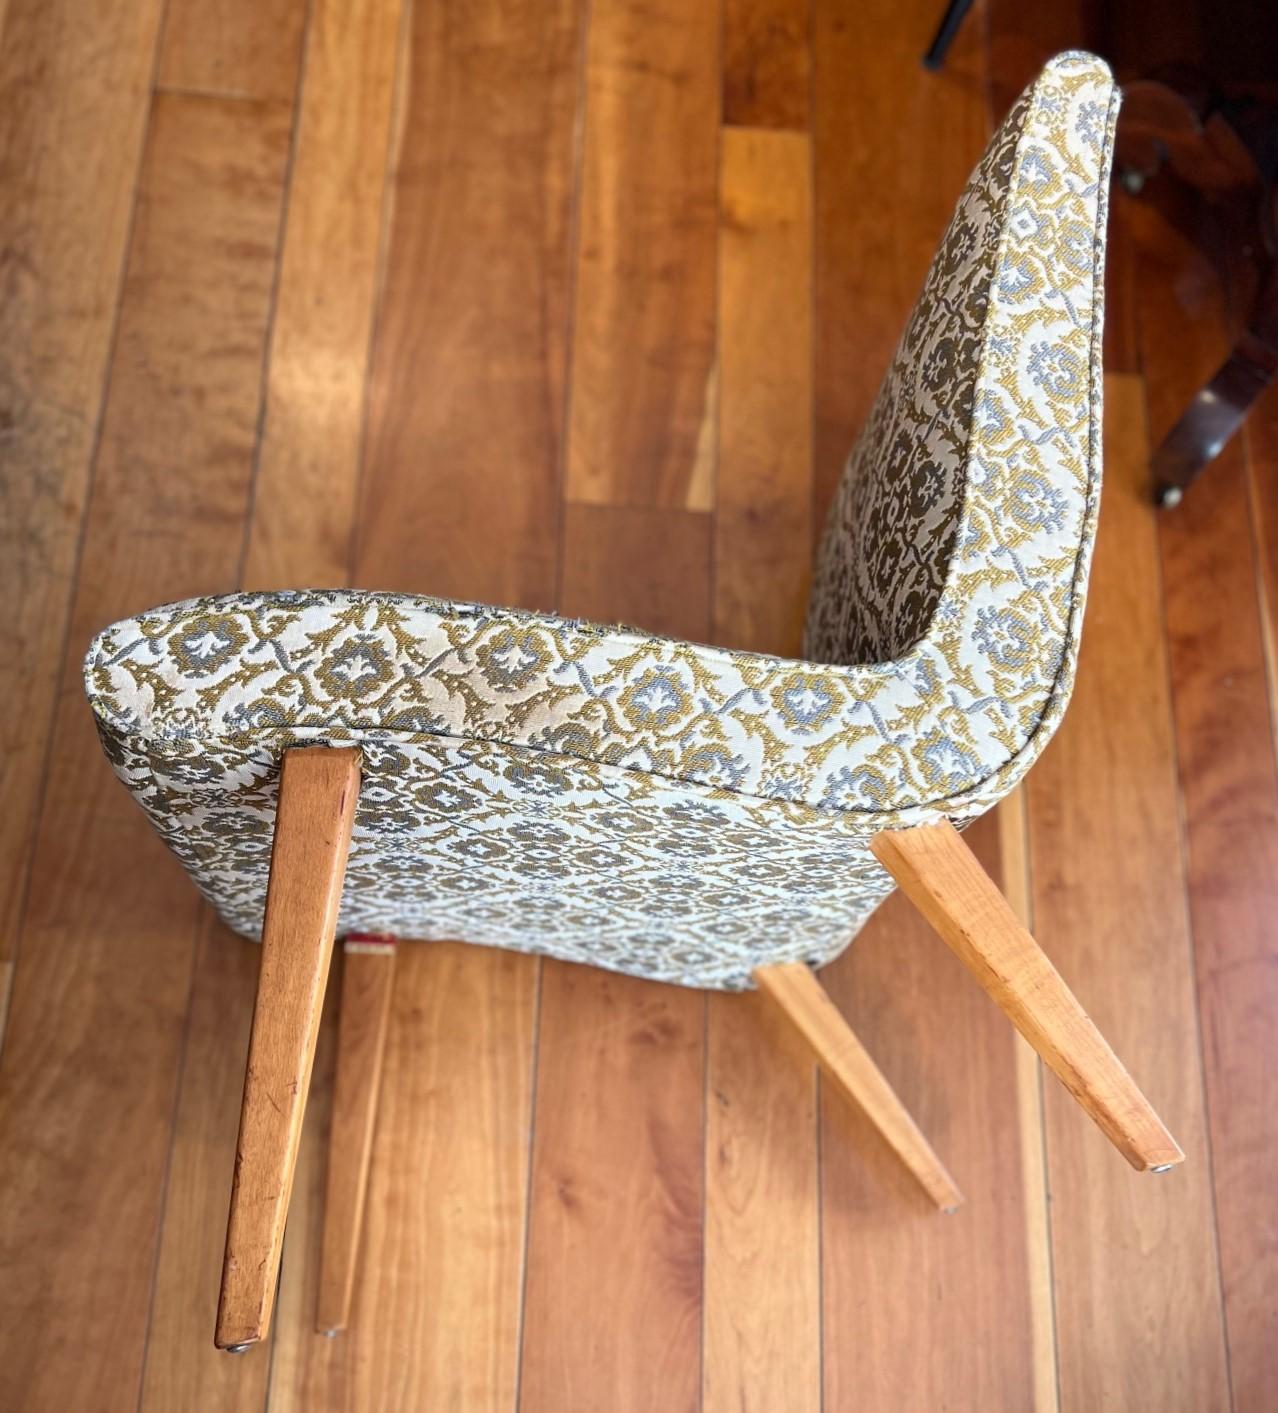 Rare Vintage Upholstered Jens Risom Vostra Easy Chair for Knoll Associates, NYC In Good Condition For Sale In Morristown, NJ